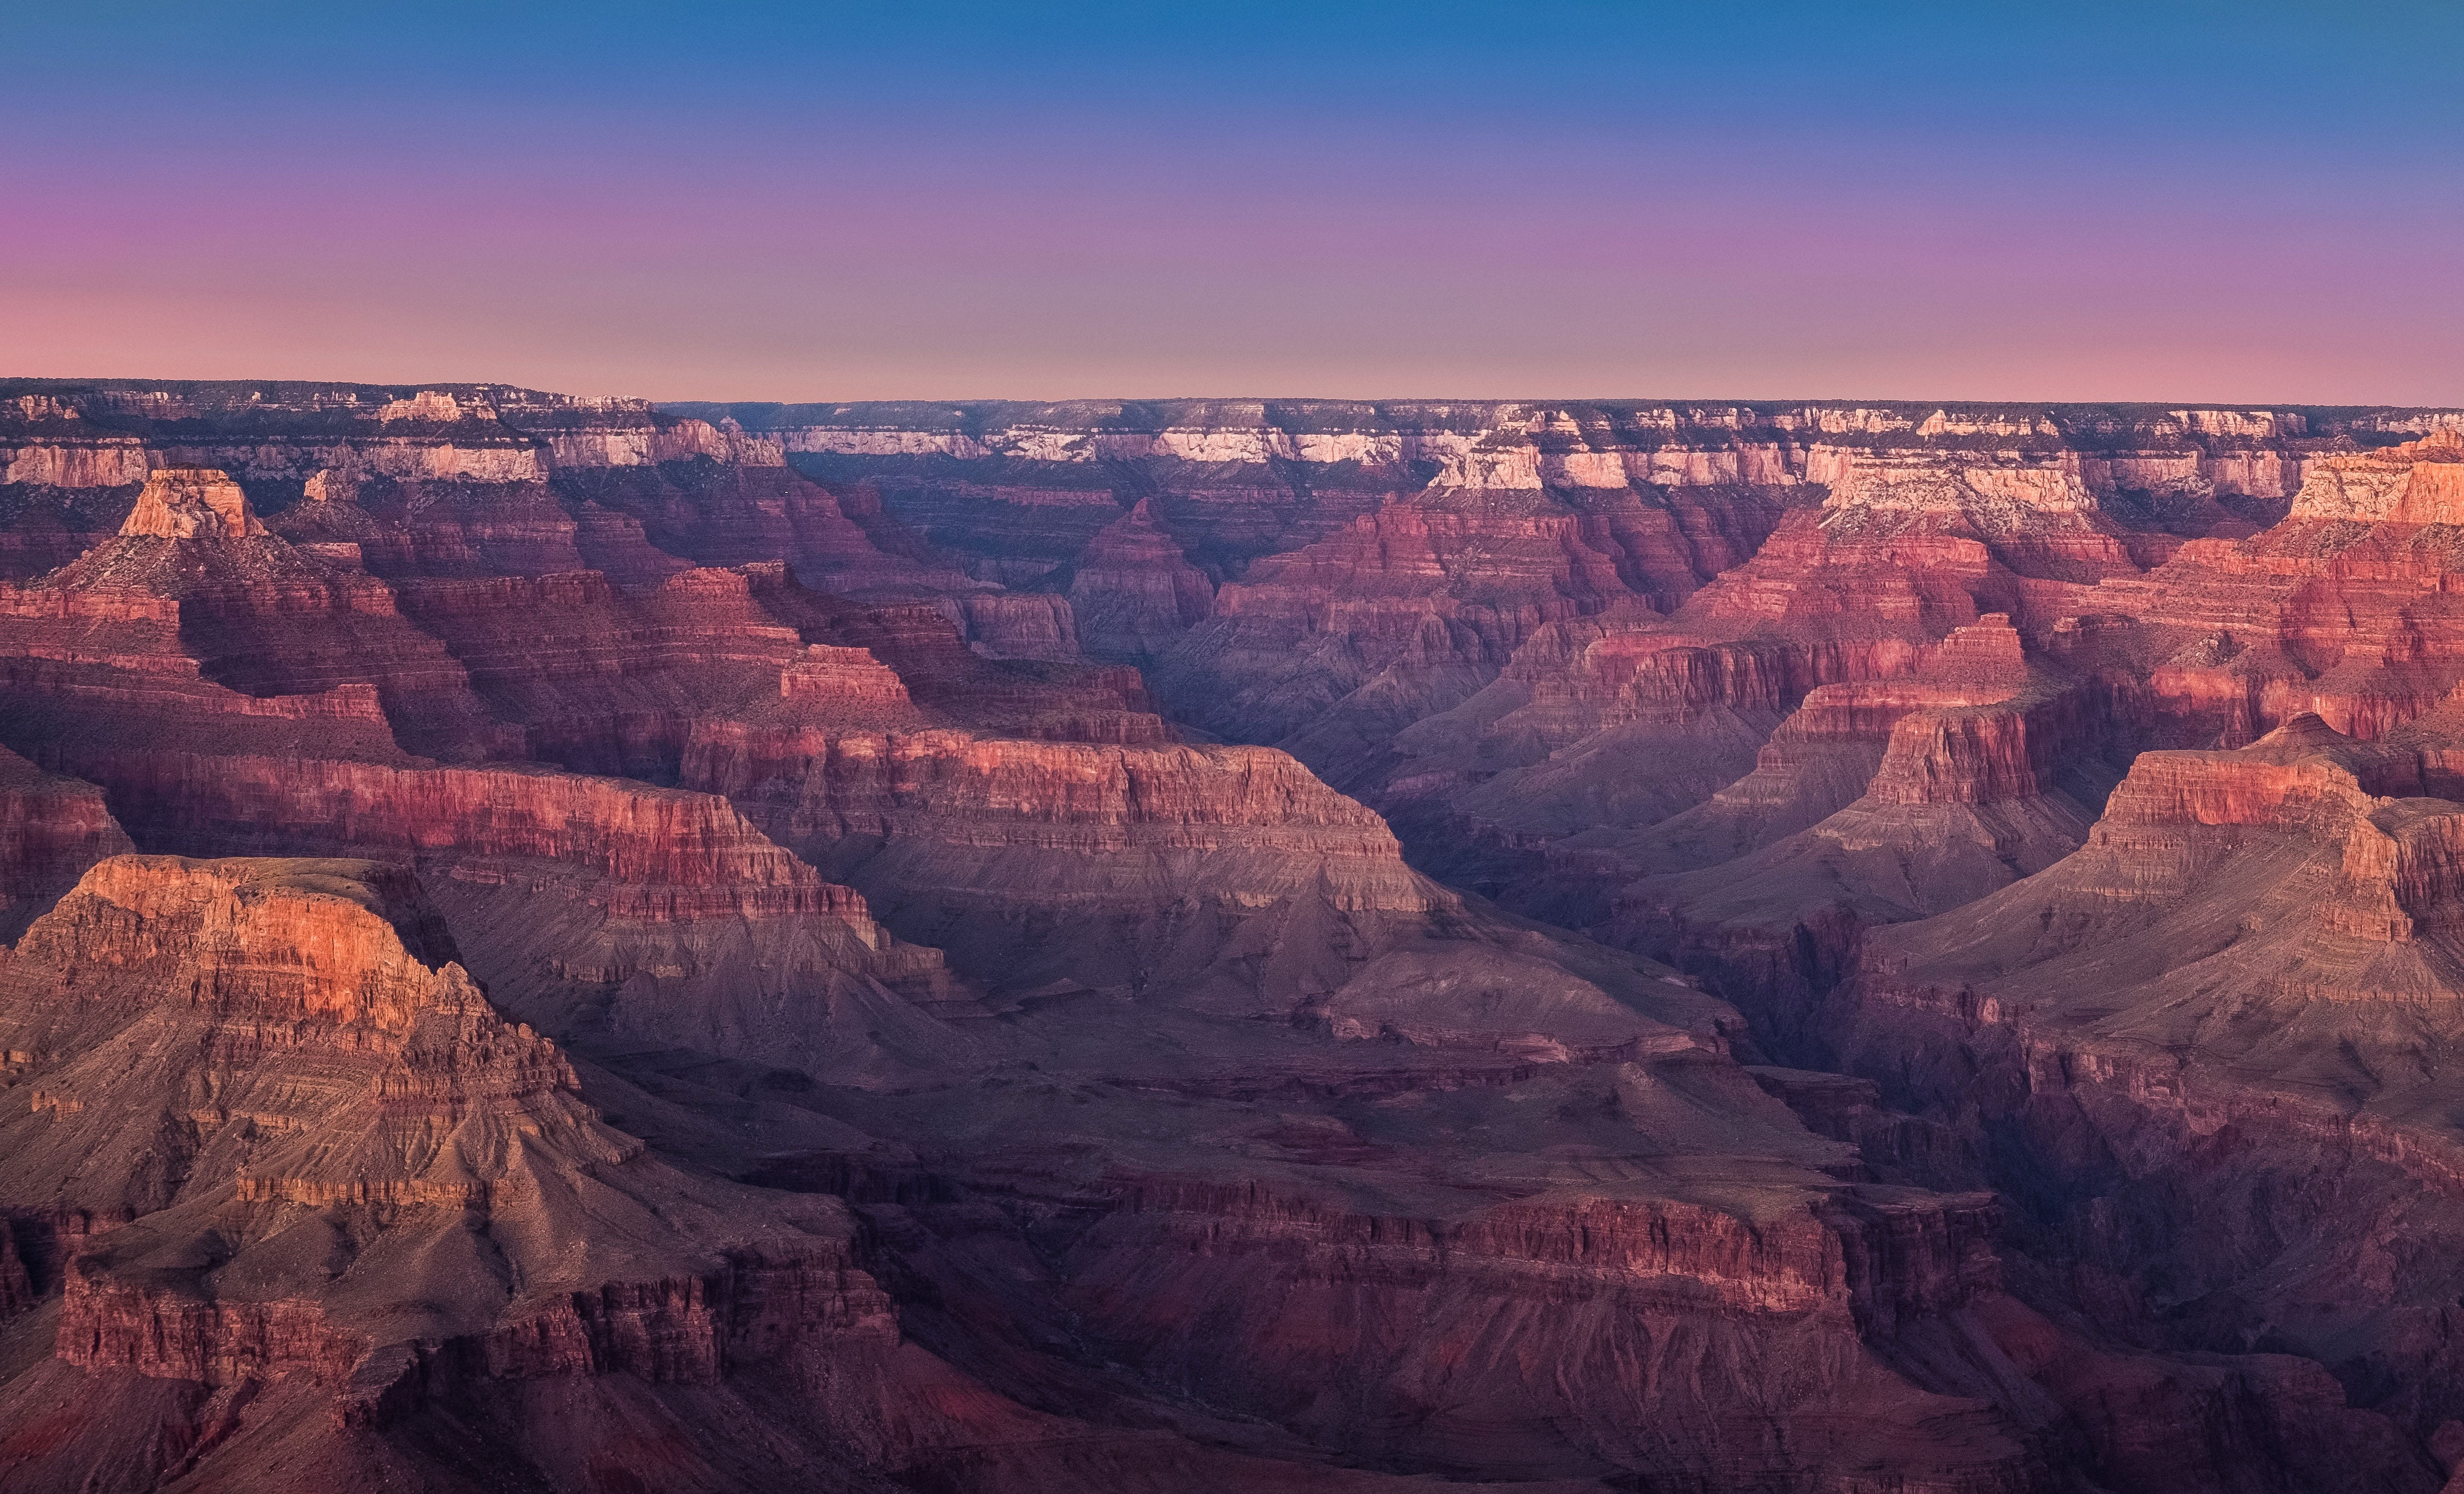 An insider's guide to the Grand Canyon - Samantha Brown's Places to Love